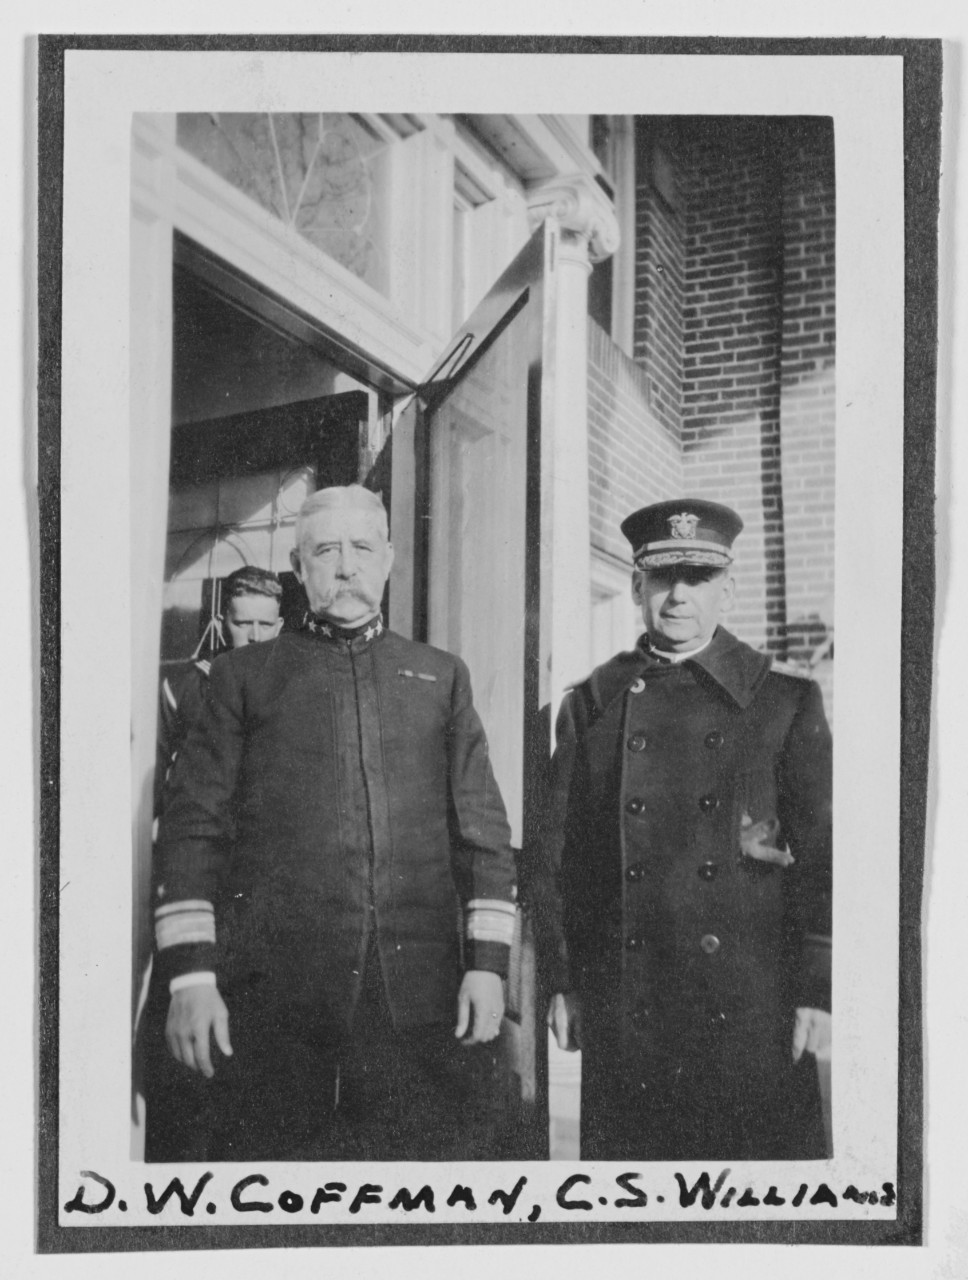 Coffman Rear Admiral D. W. and Vice Admiral C.S. Williams, (Ret)